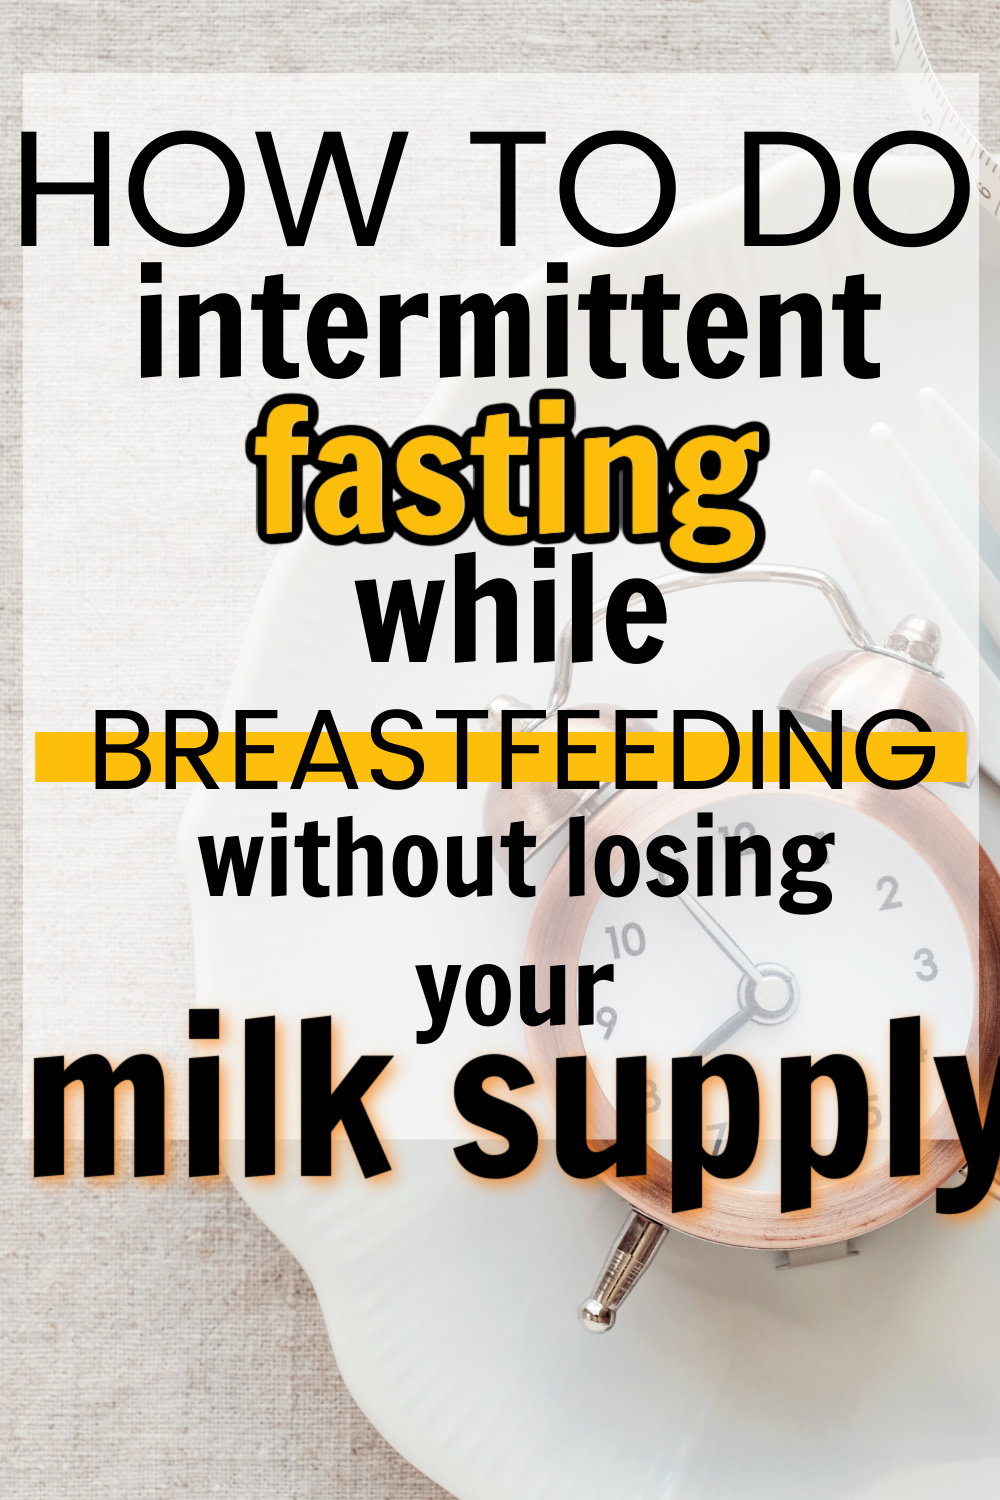 Intermittent fasting is all the rage - but can you do it while breastfeeding as a new mom to lose some baby weight? Here is my experience and success with Intermittent Fasting while breastfeeding and what I found out, especially in regards to my milk production.